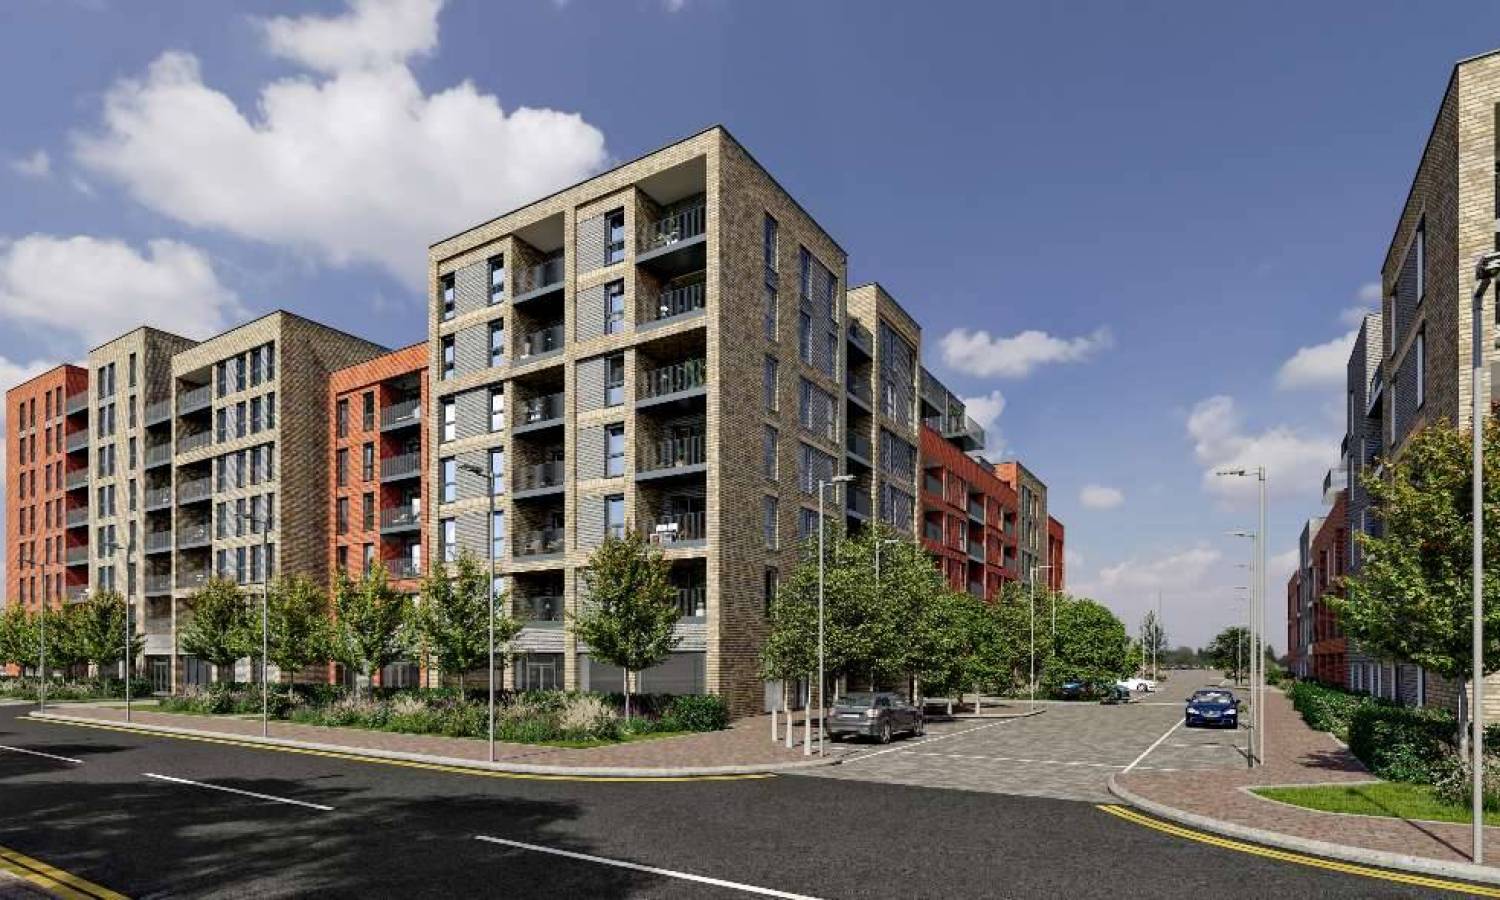 New Build Homes: Fairview Launches New Save to Buy Scheme 